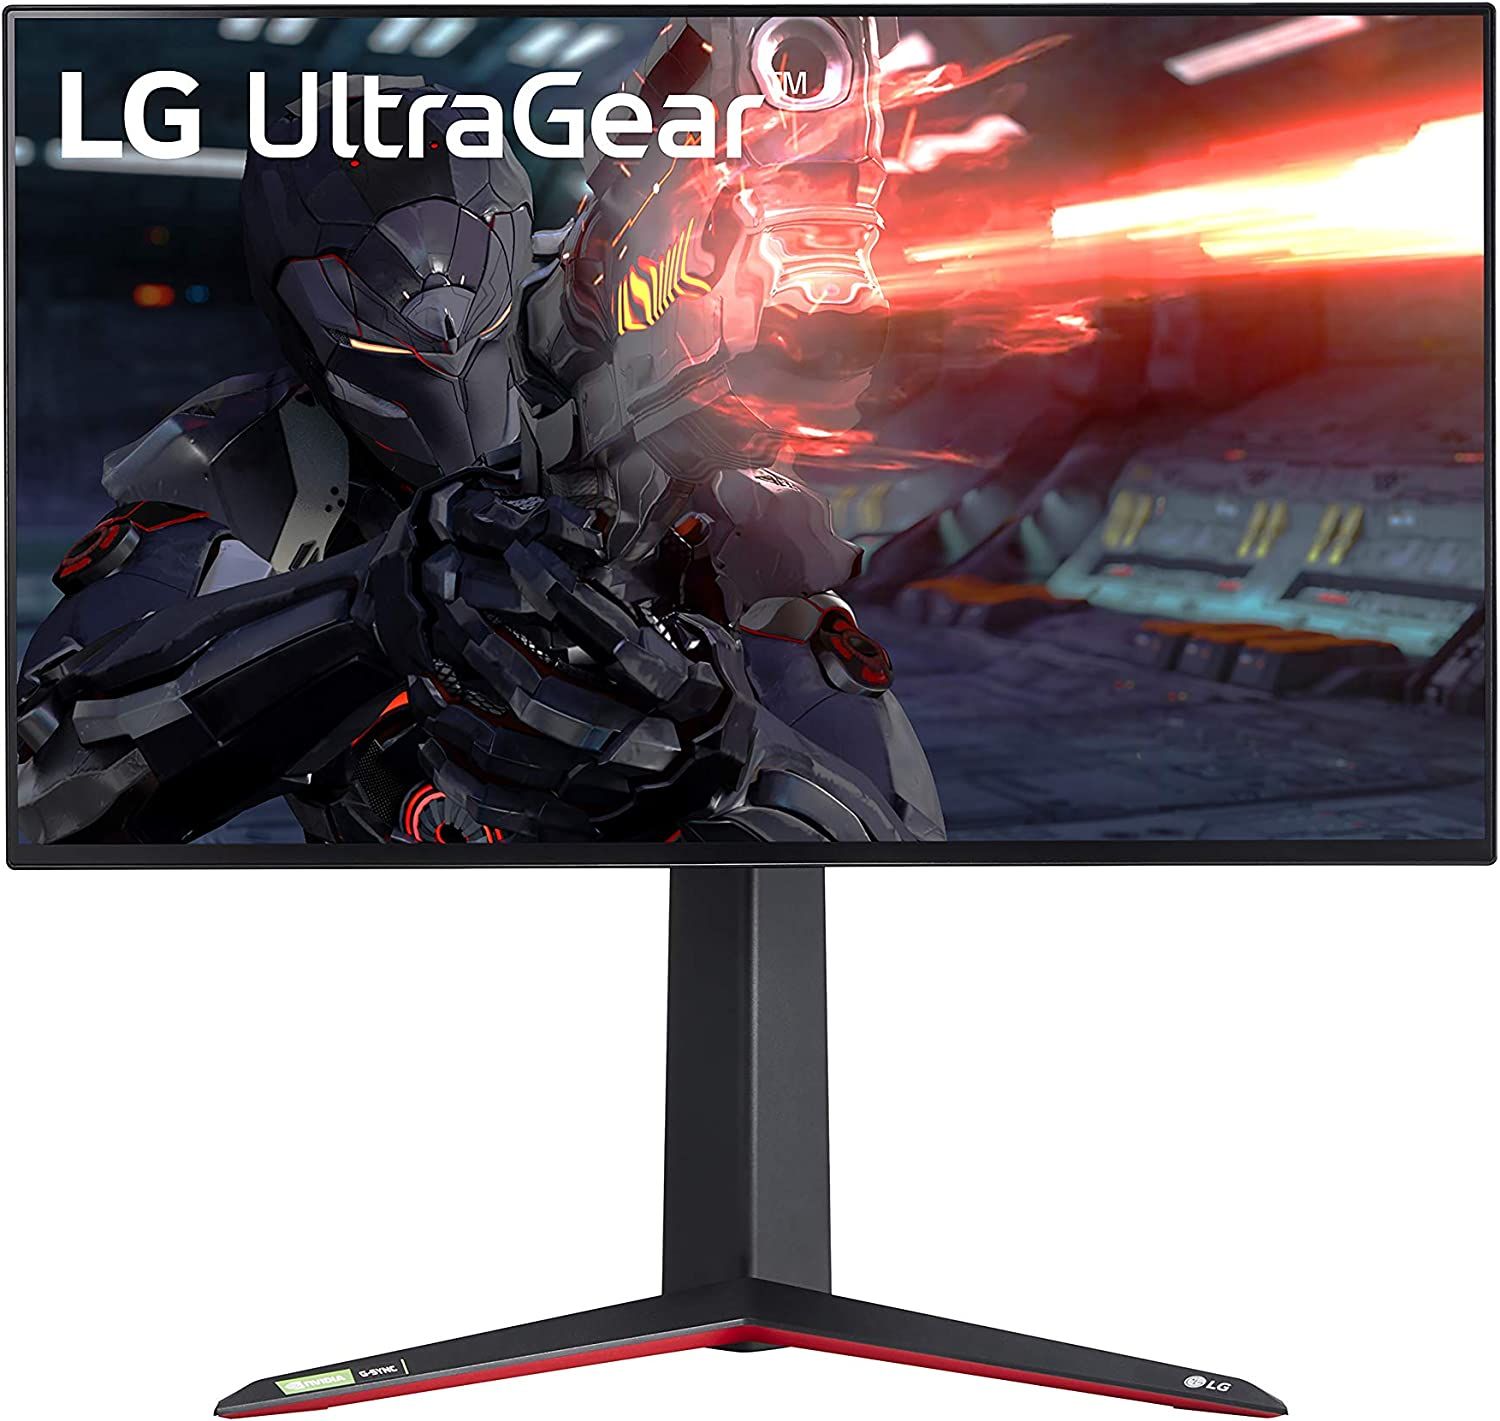 This 1440p 240Hz LG monitor is down to $350 in the US